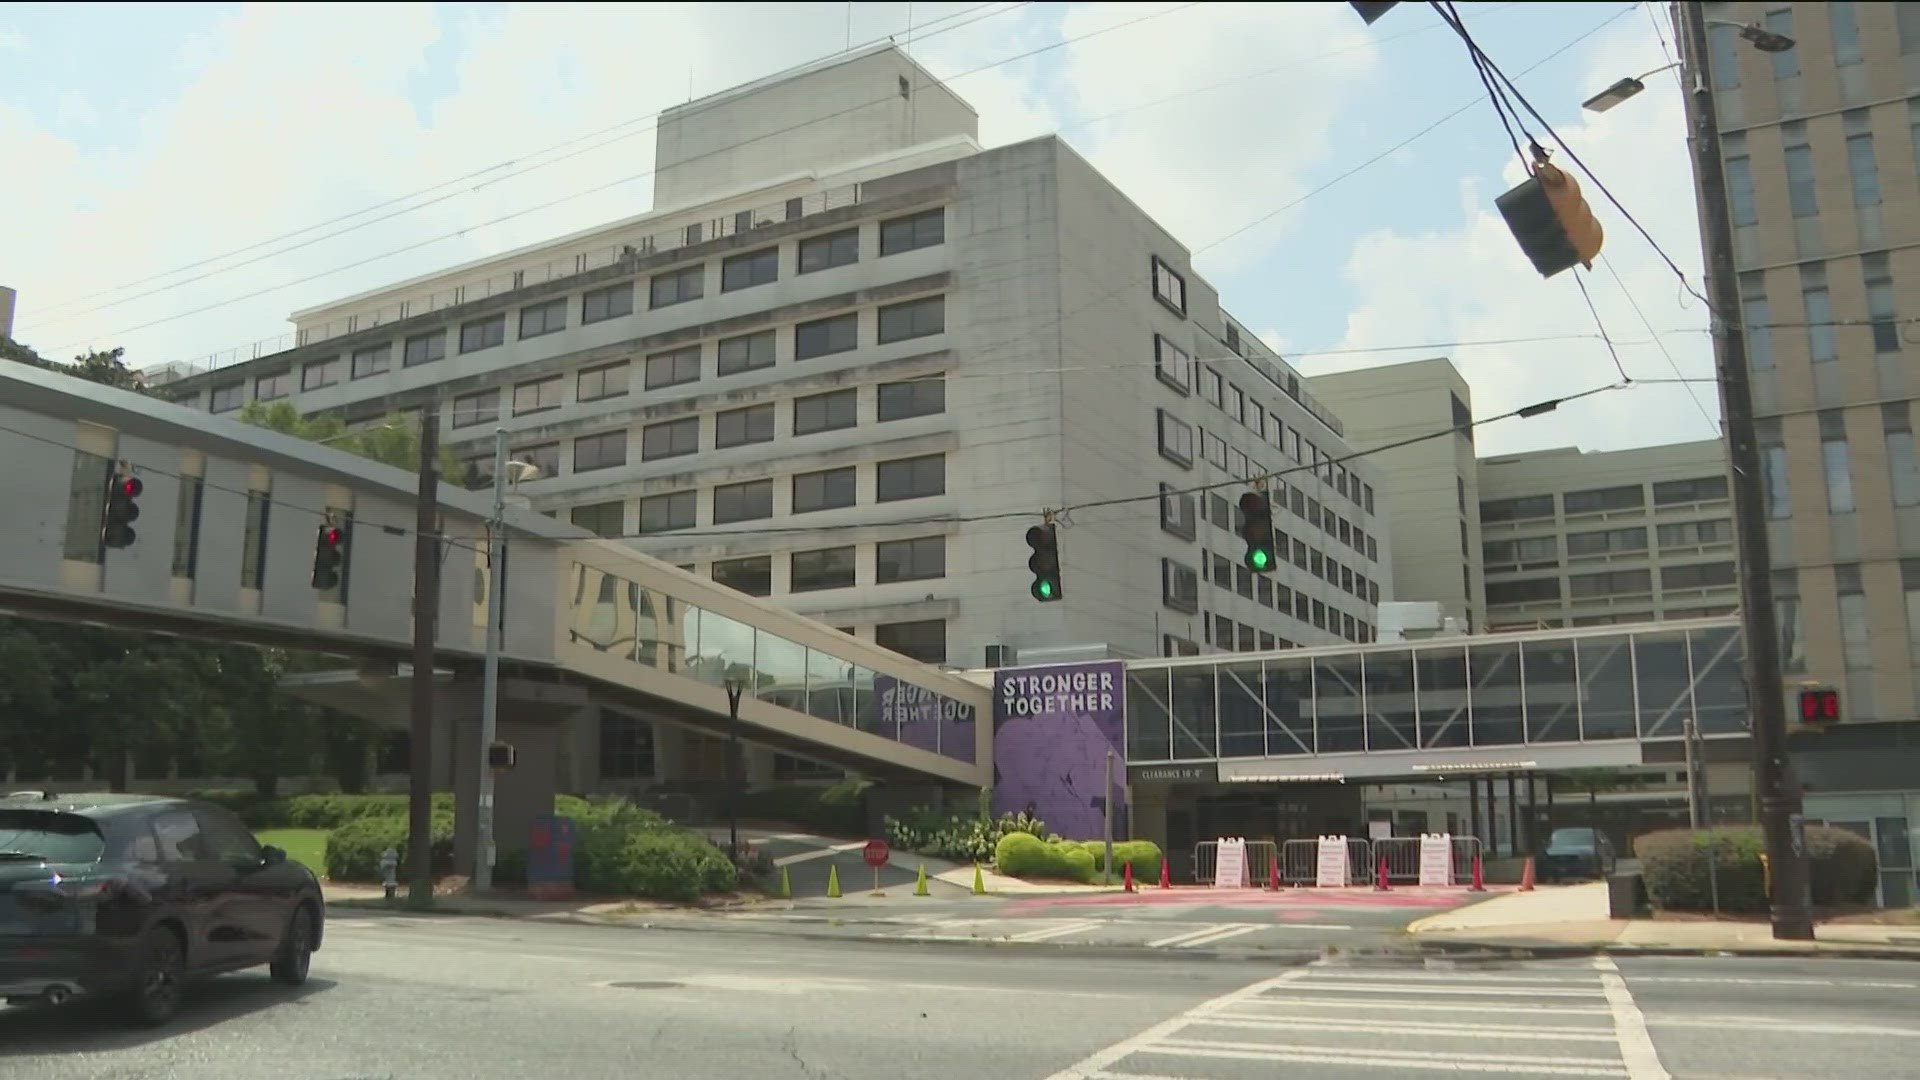 Fulton County Commission Chair Robert Pitts says there's a long term plan to get another hospital up and running.